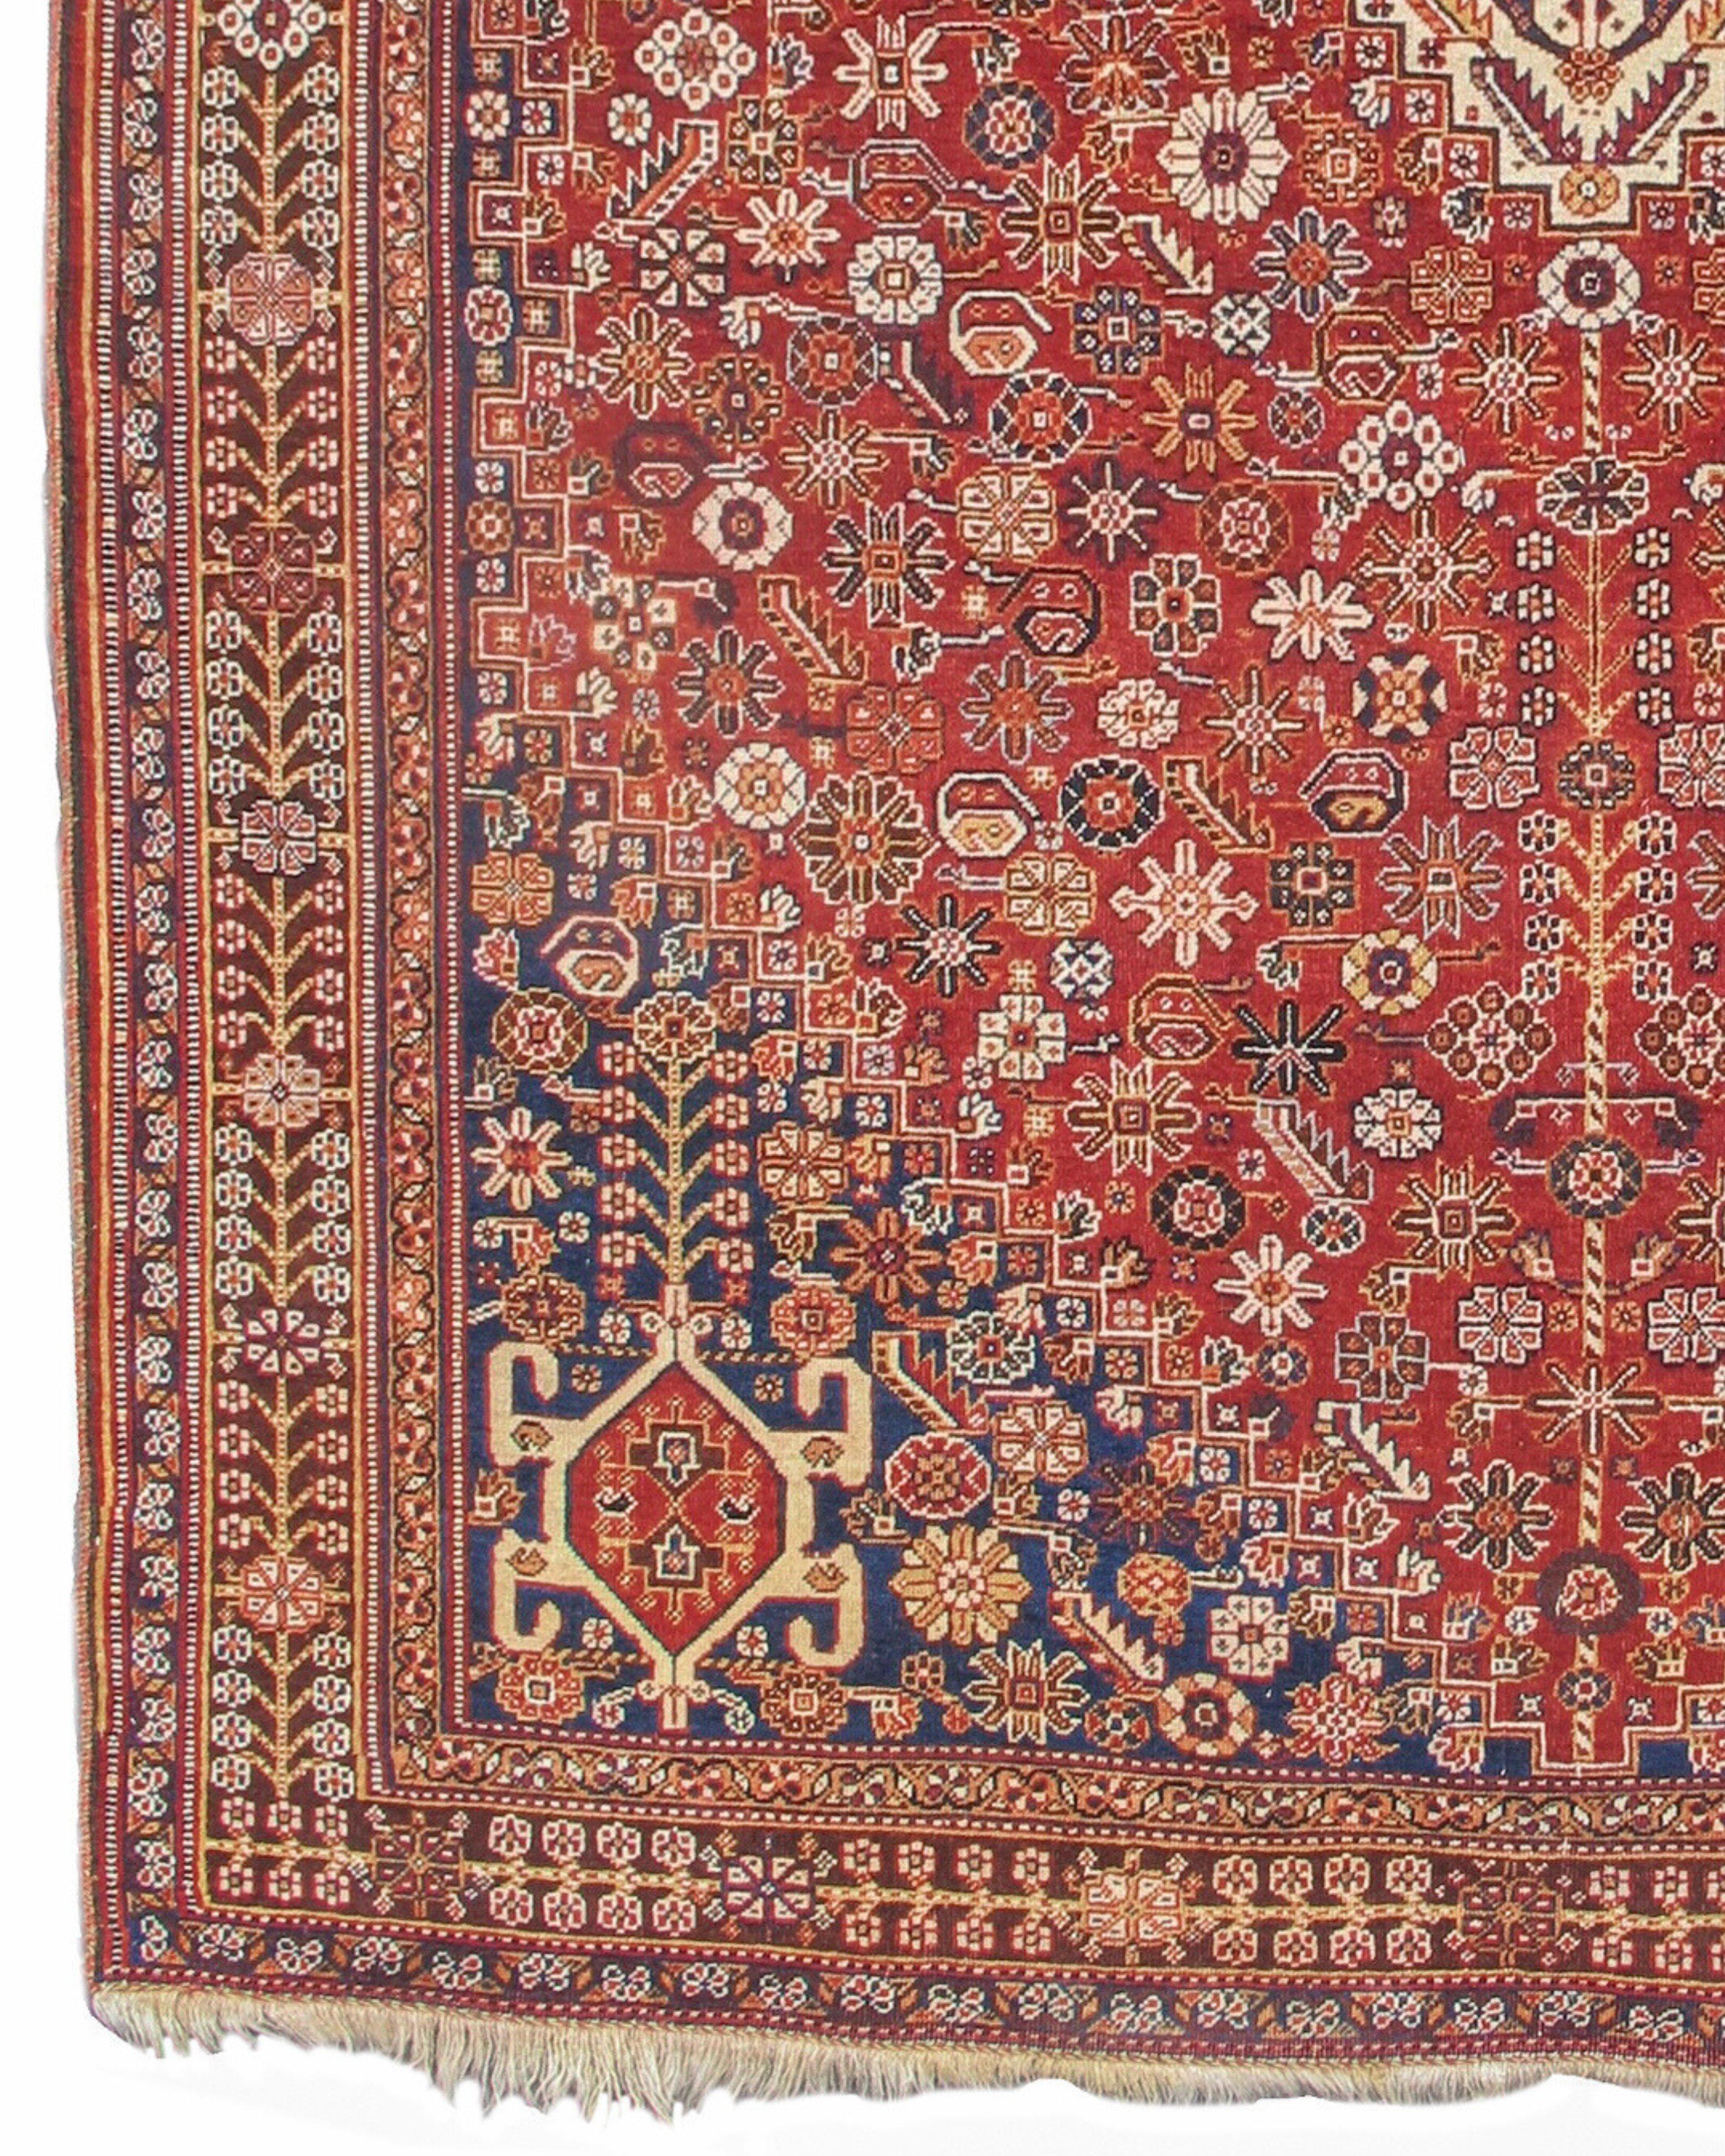 Antique Persian Qashqai Rug, c. 1900 In Excellent Condition For Sale In San Francisco, CA